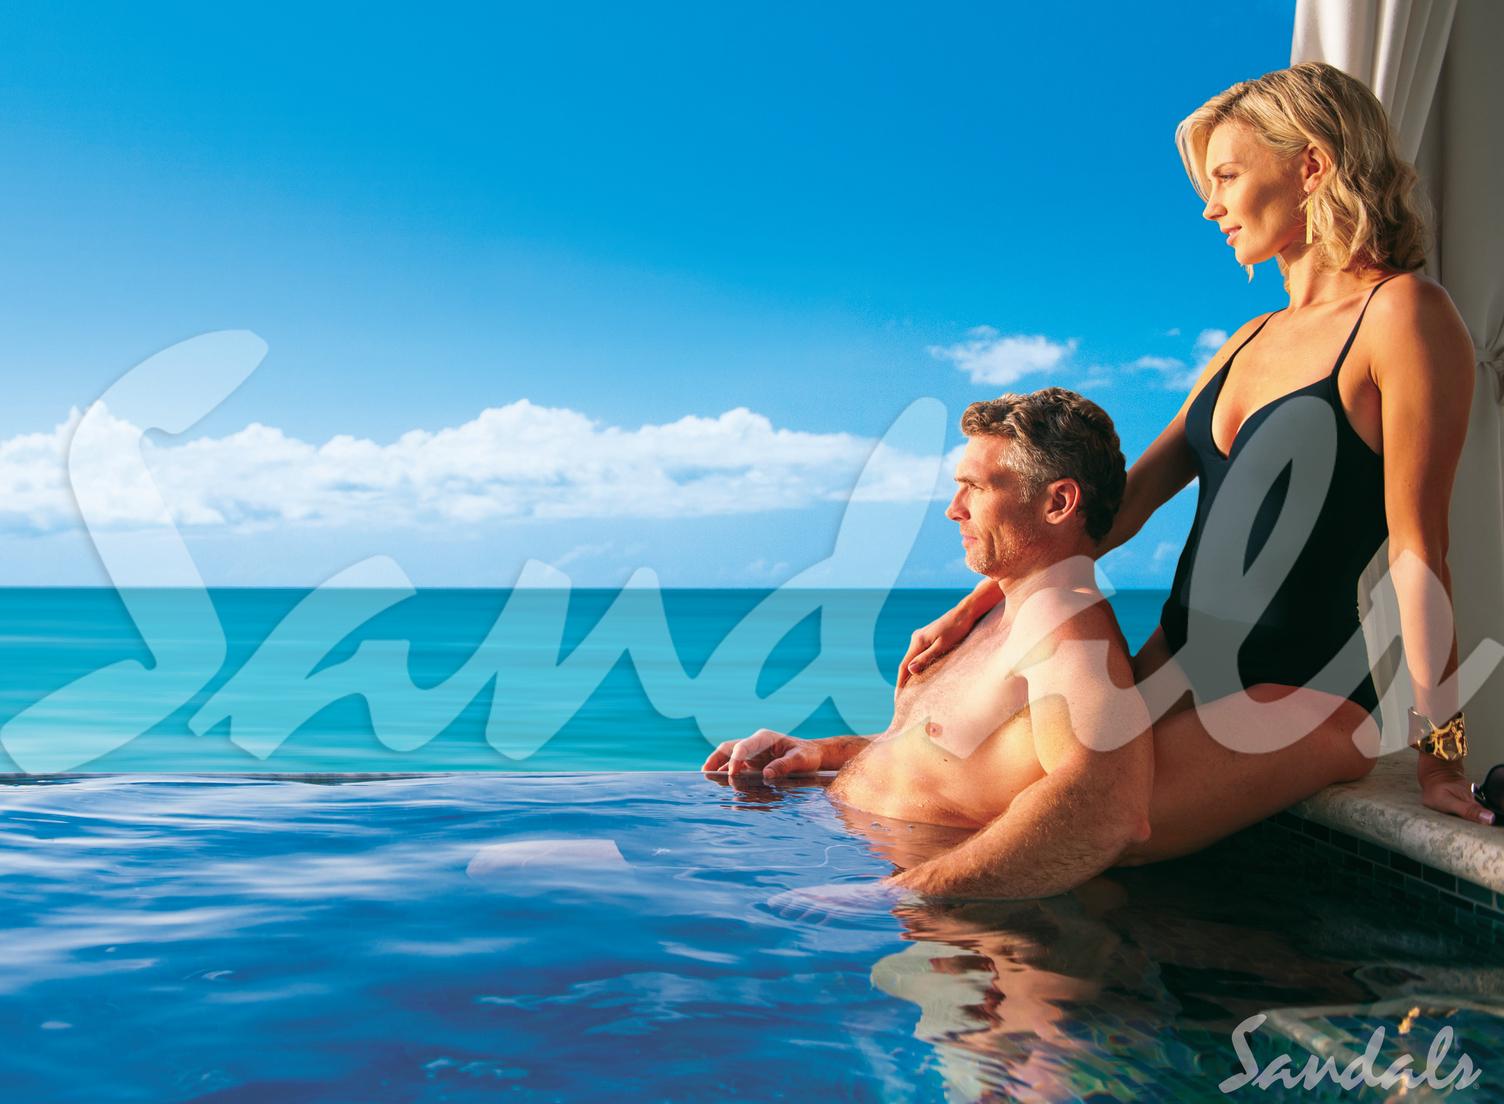 Experience "The World's Most Innovative All-Inclusive Resort" at Sandals Grenada Resort & Spa